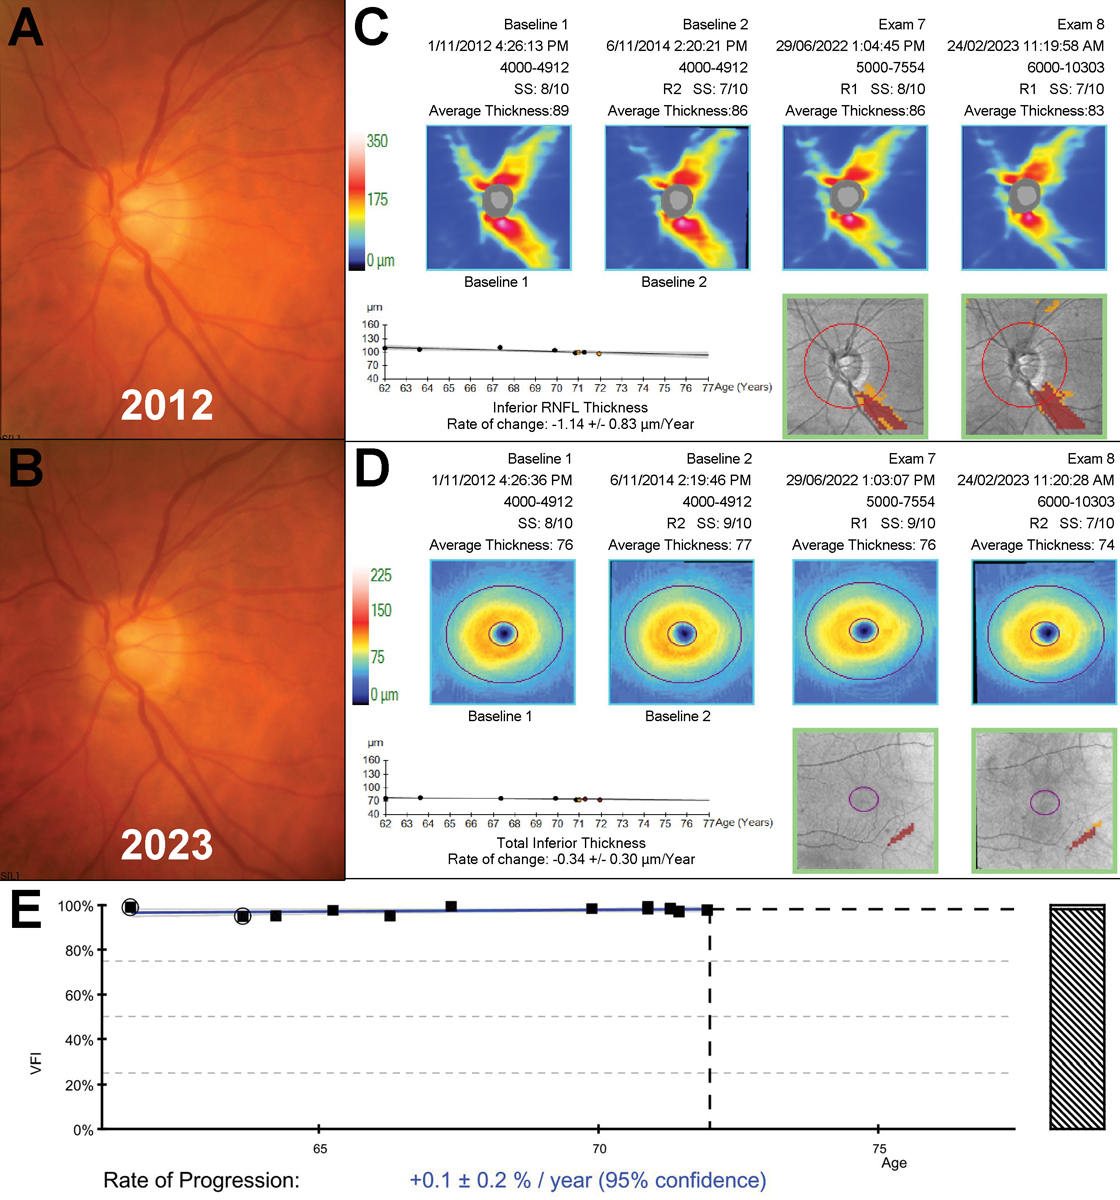 Fig. 2. An example of a 72-year-old patient with slow progressing untreated normal tension glaucoma monitored over an 11-year period. A to B: Fundus photographs showed subtle thinning of the inferior neuroretinal rim between 2012 and 2023. C to D: Structural progression analyses showed slow inferior thinning on both the RNFL and ganglion cell-inner plexiform layer printouts. E: VF index progression analysis showed no evidence of associated functional deterioration. 